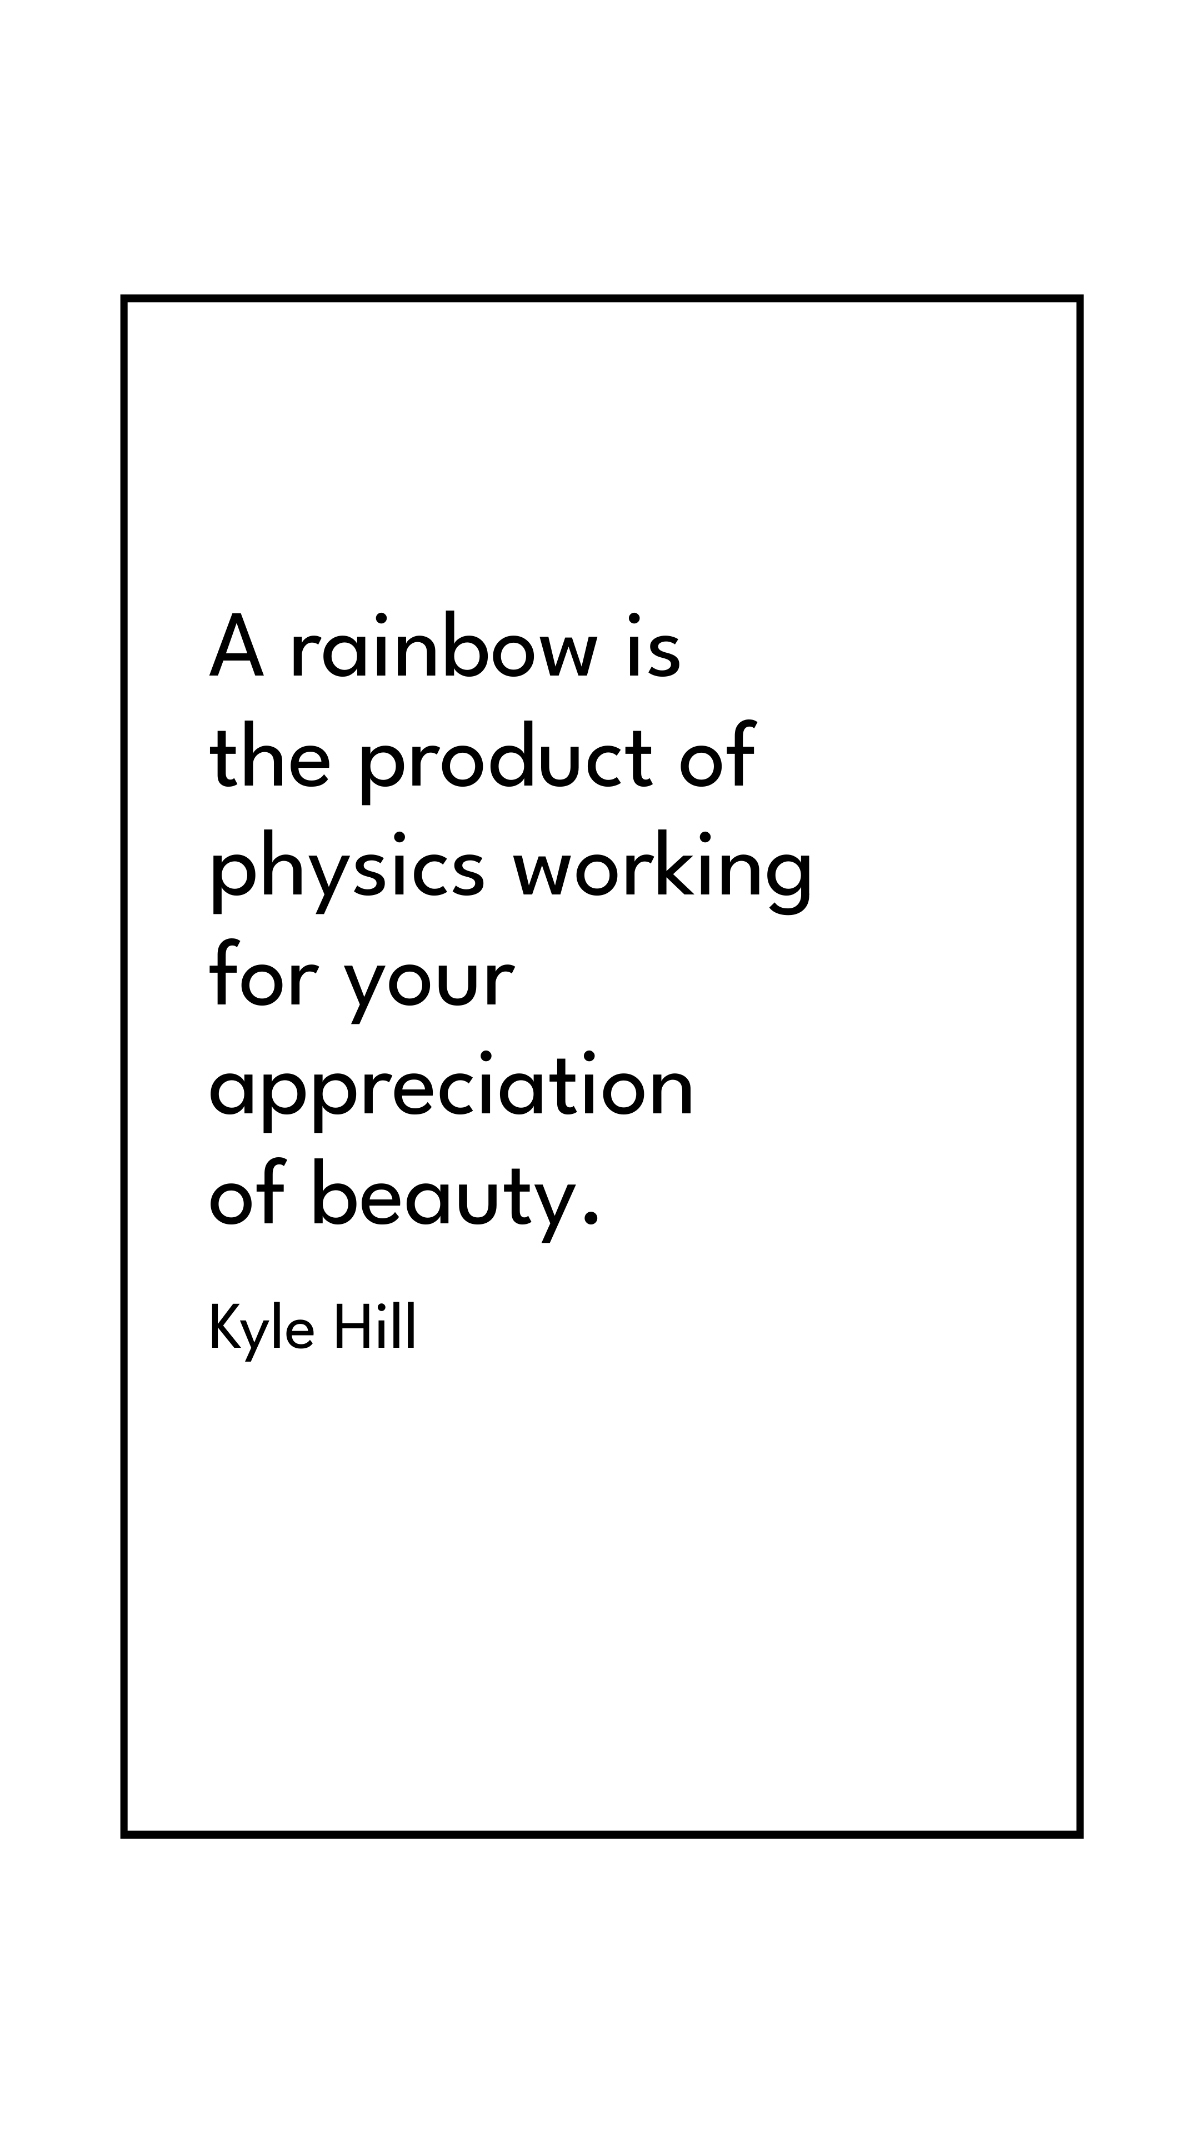 Kyle Hill - A rainbow is the product of physics working for your appreciation of beauty. Template